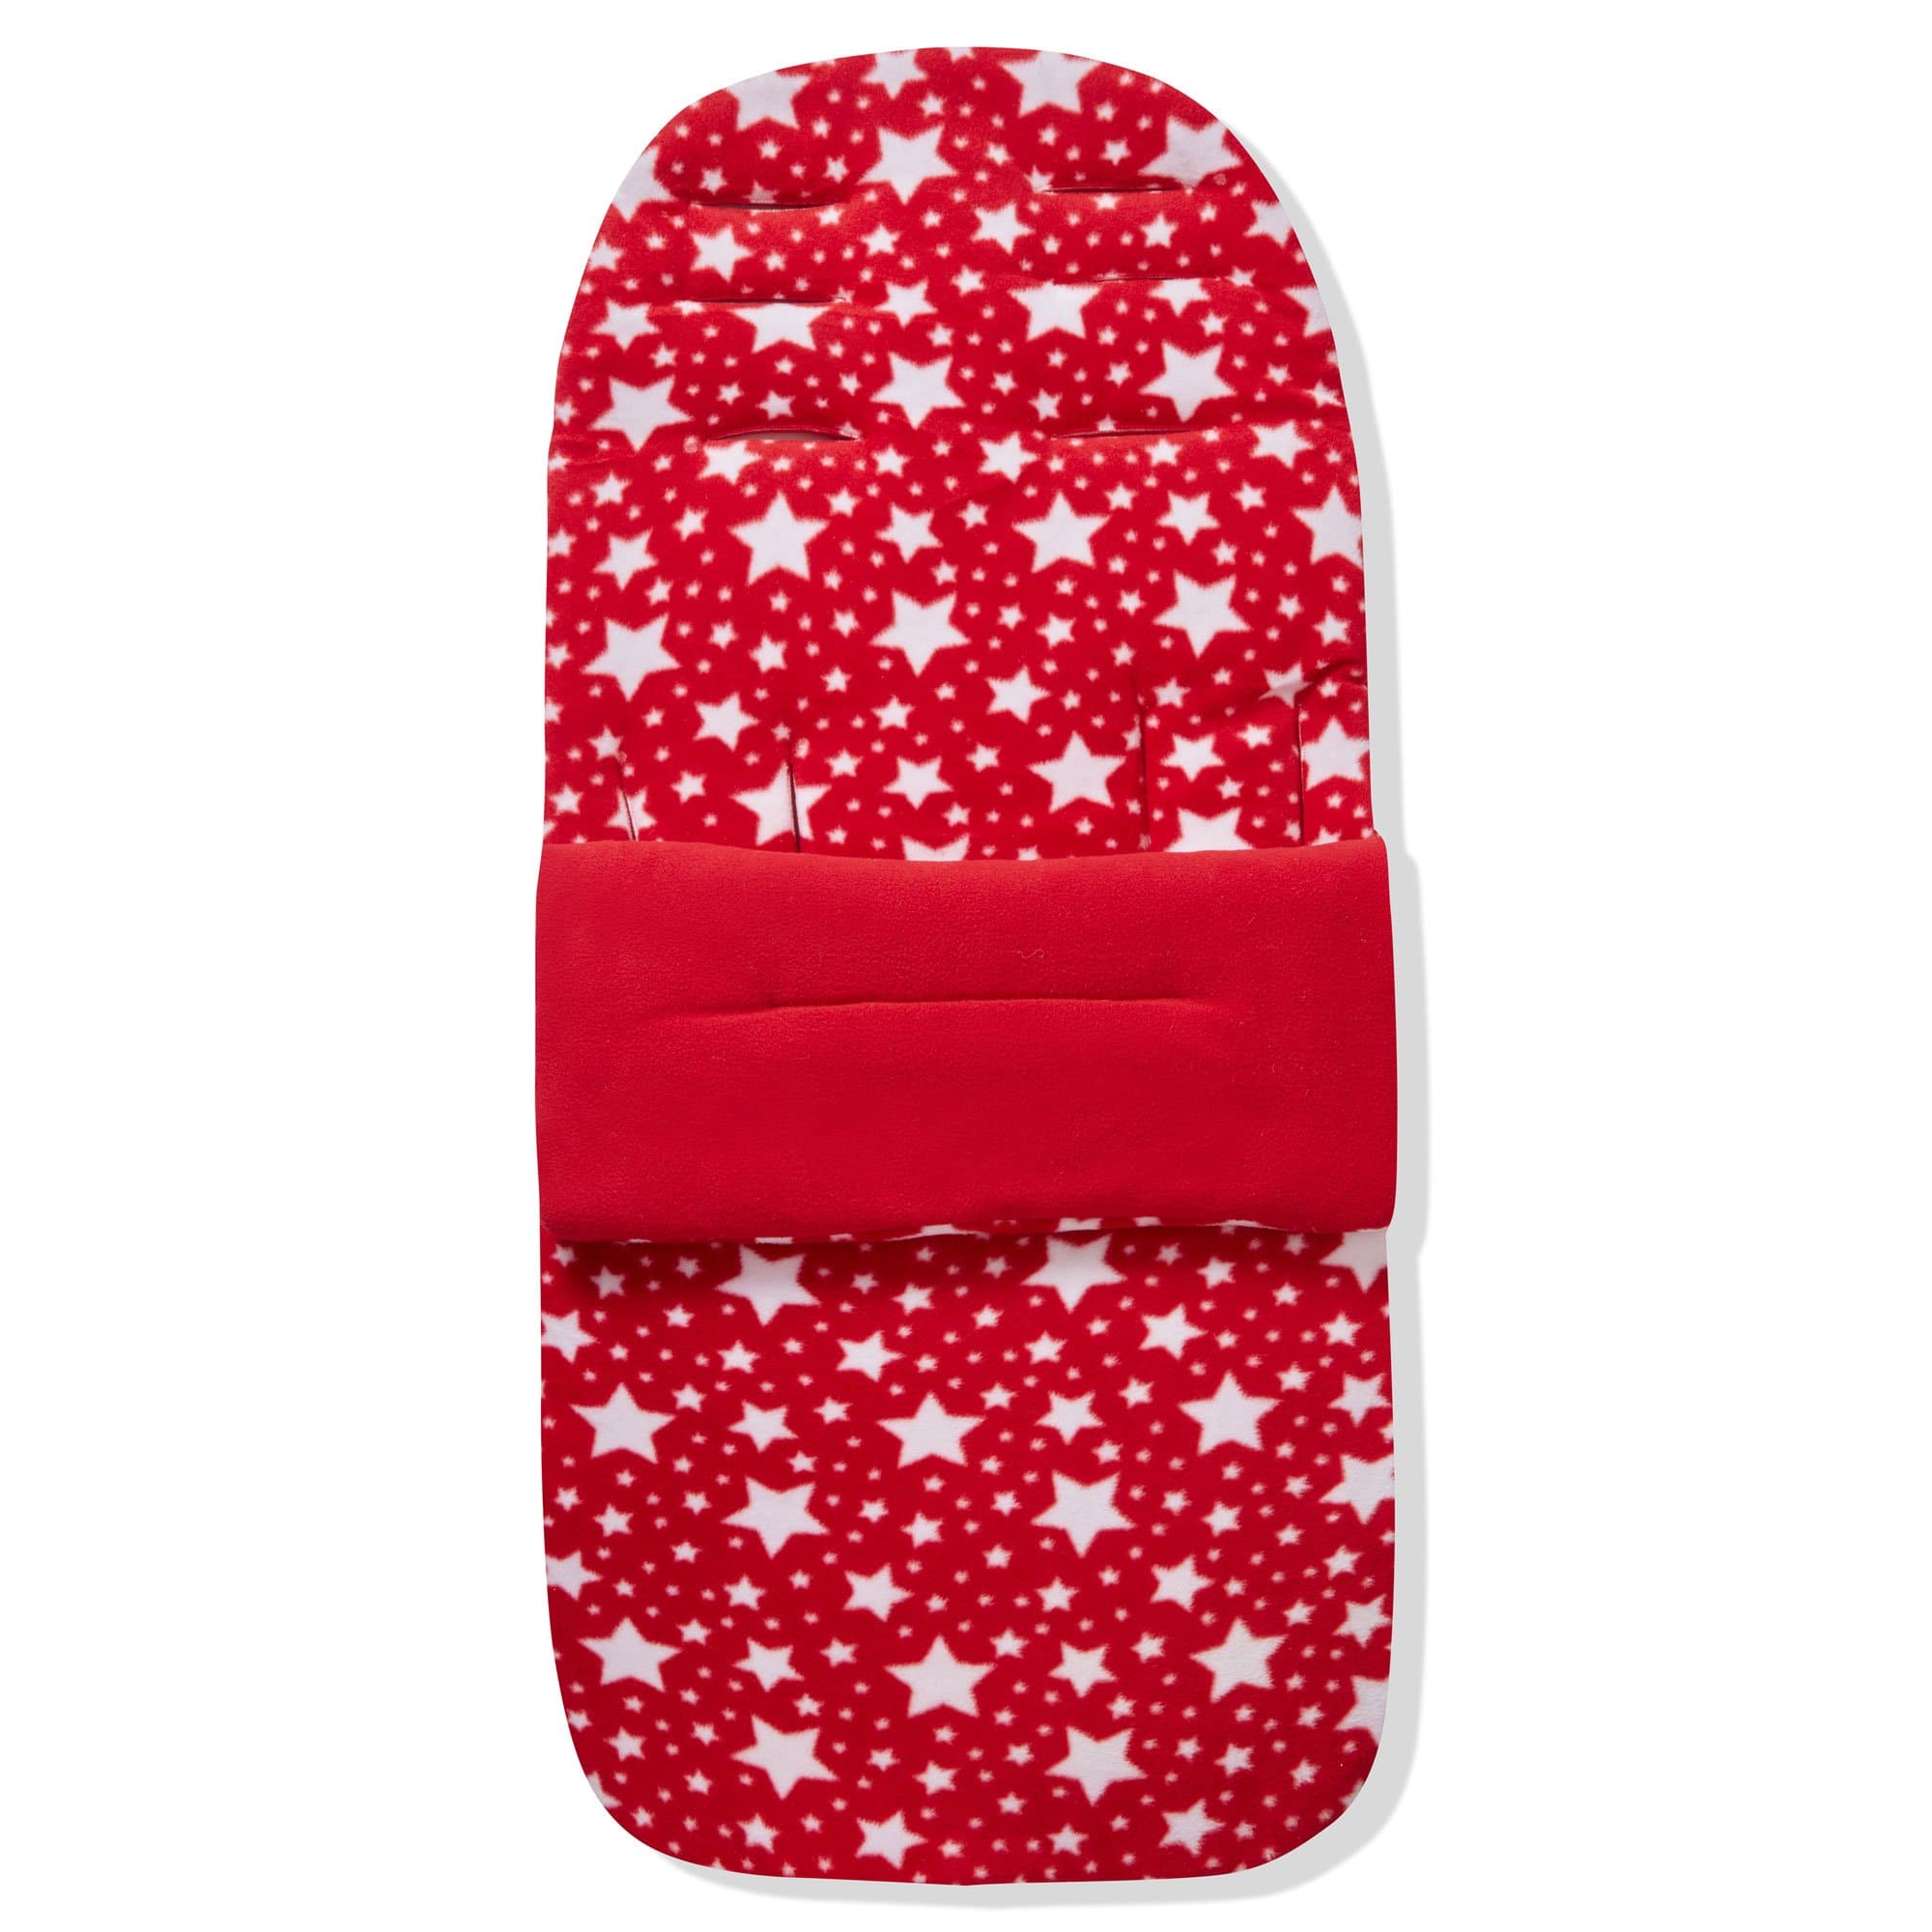 Fleece Footmuff / Cosy Toes Compatible with Babylo - Red Star / Fits All Models | For Your Little One